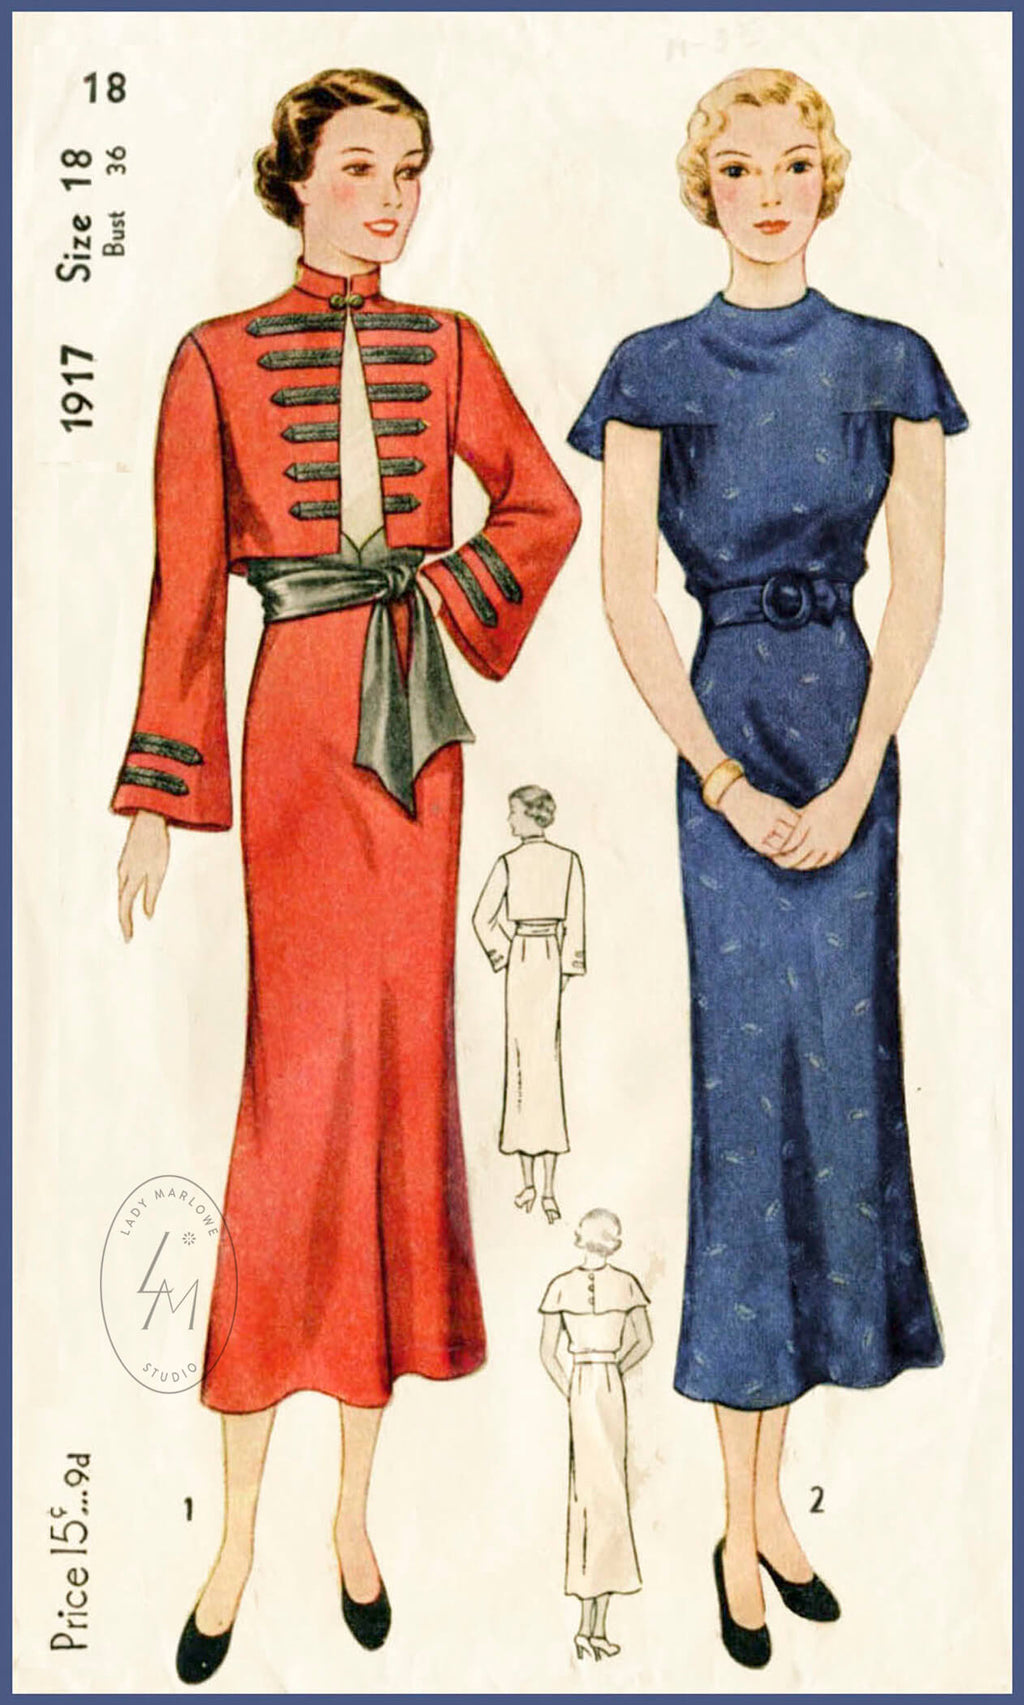 Simplicity 1917 1930s vintage sewing pattern dress military jacket